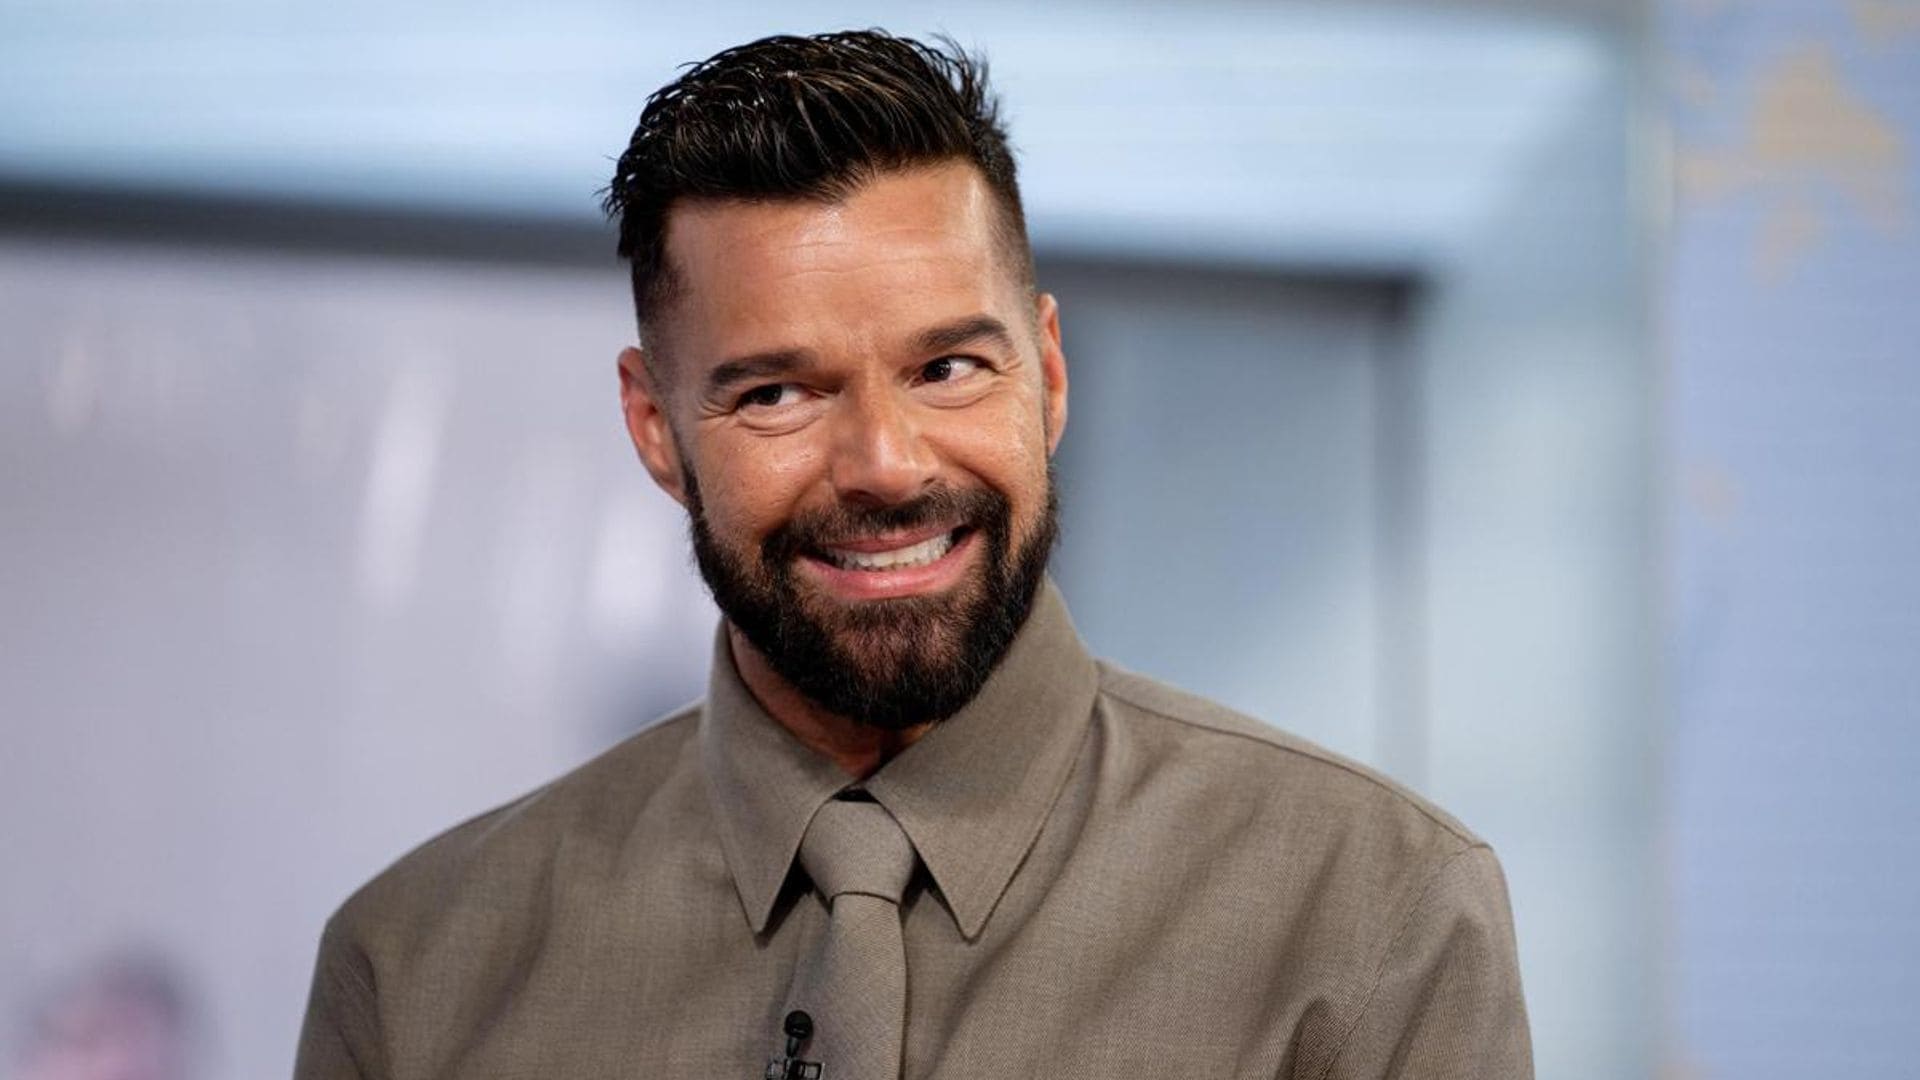 Ricky Martin reveals if he is dating someone new